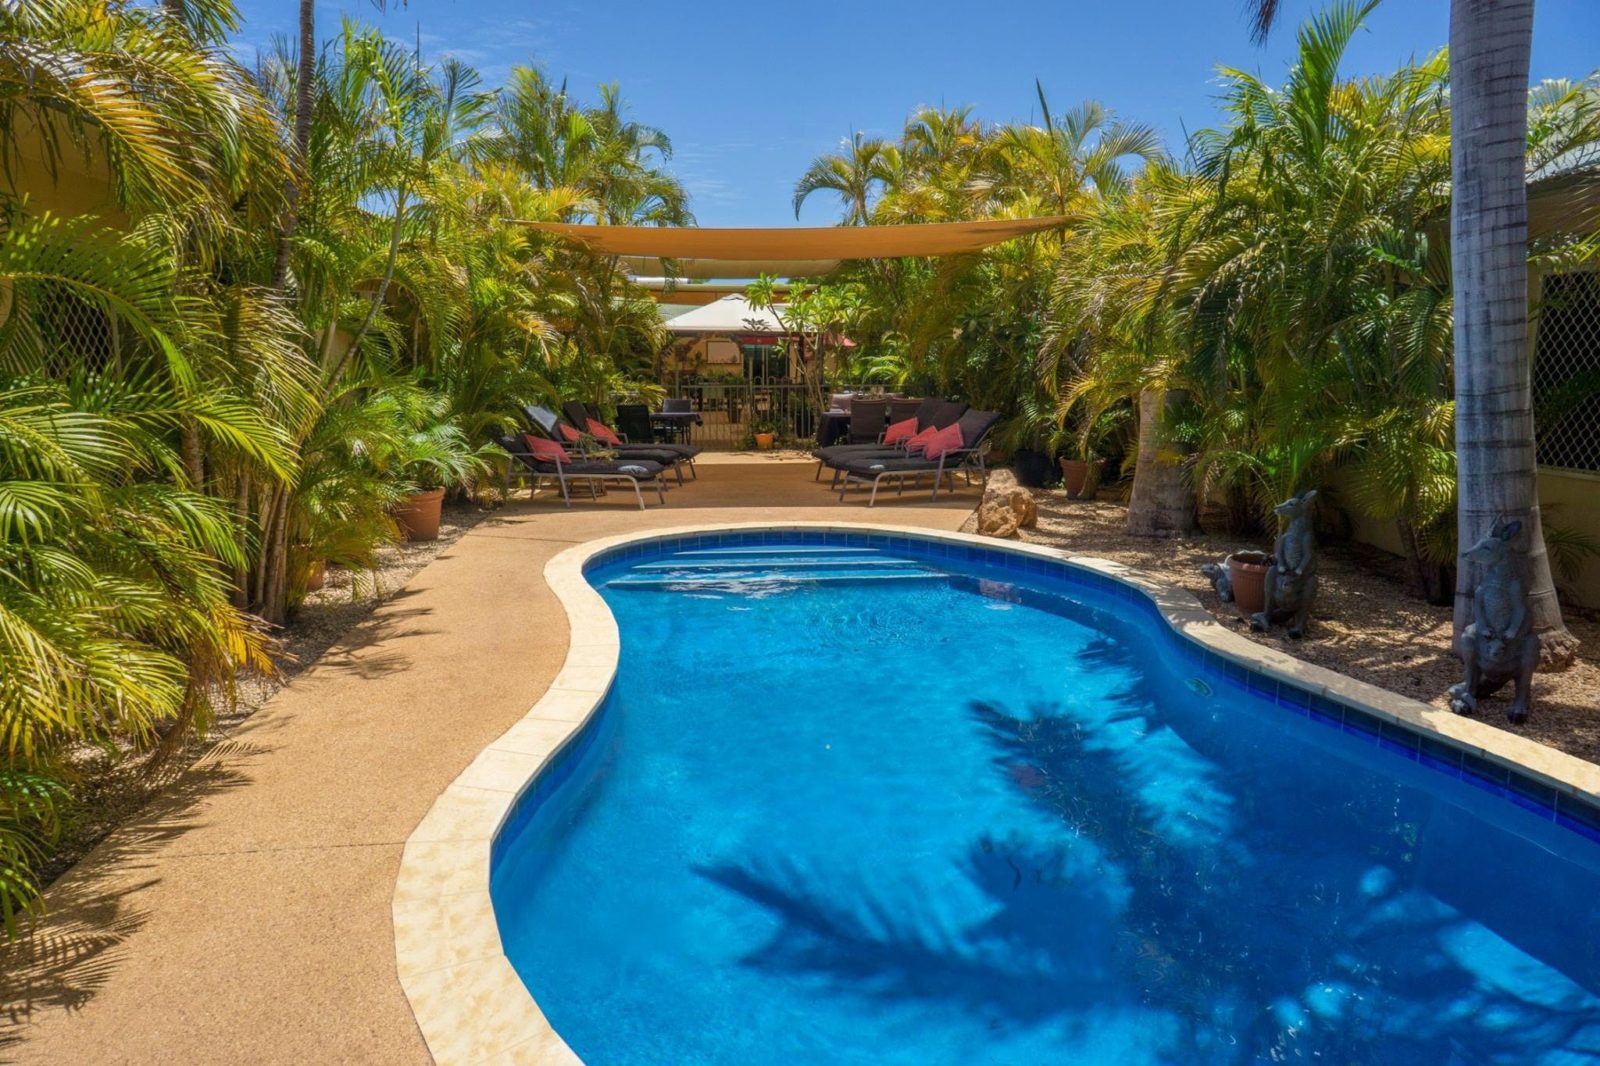 Swimmingpool - Relax in tropical surrounds. Ningaloo Lodge is famous for luxury gardens.